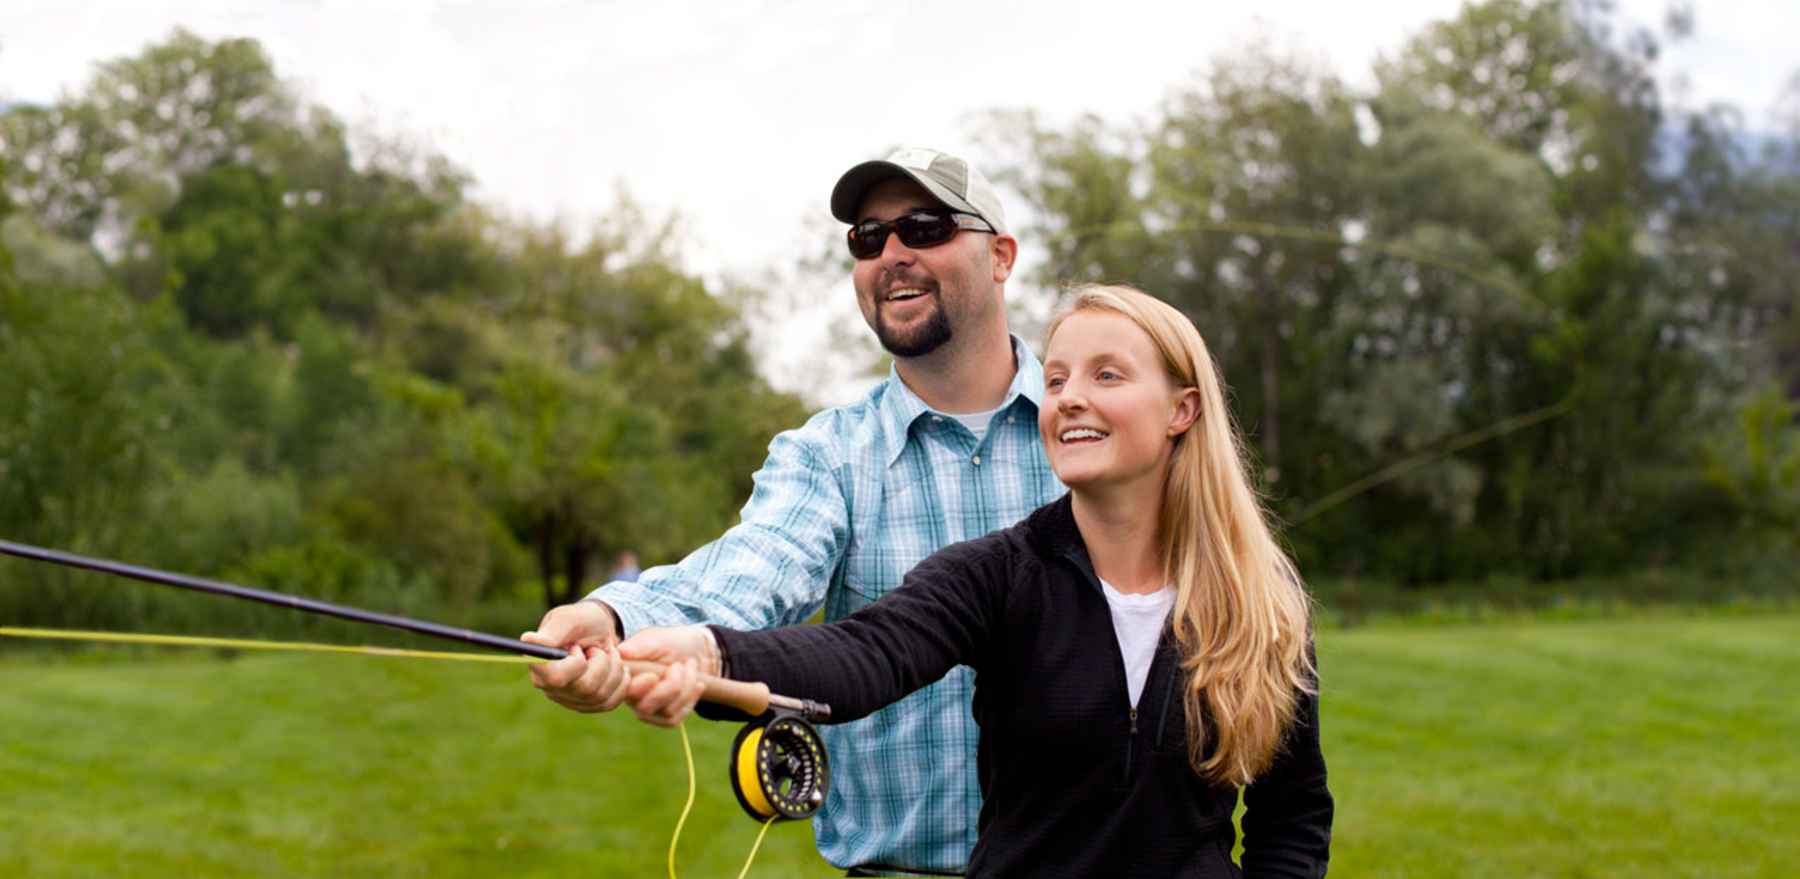 Free fly fishing classes from Orvis | Hatch Magazine - Fly Fishing, etc.